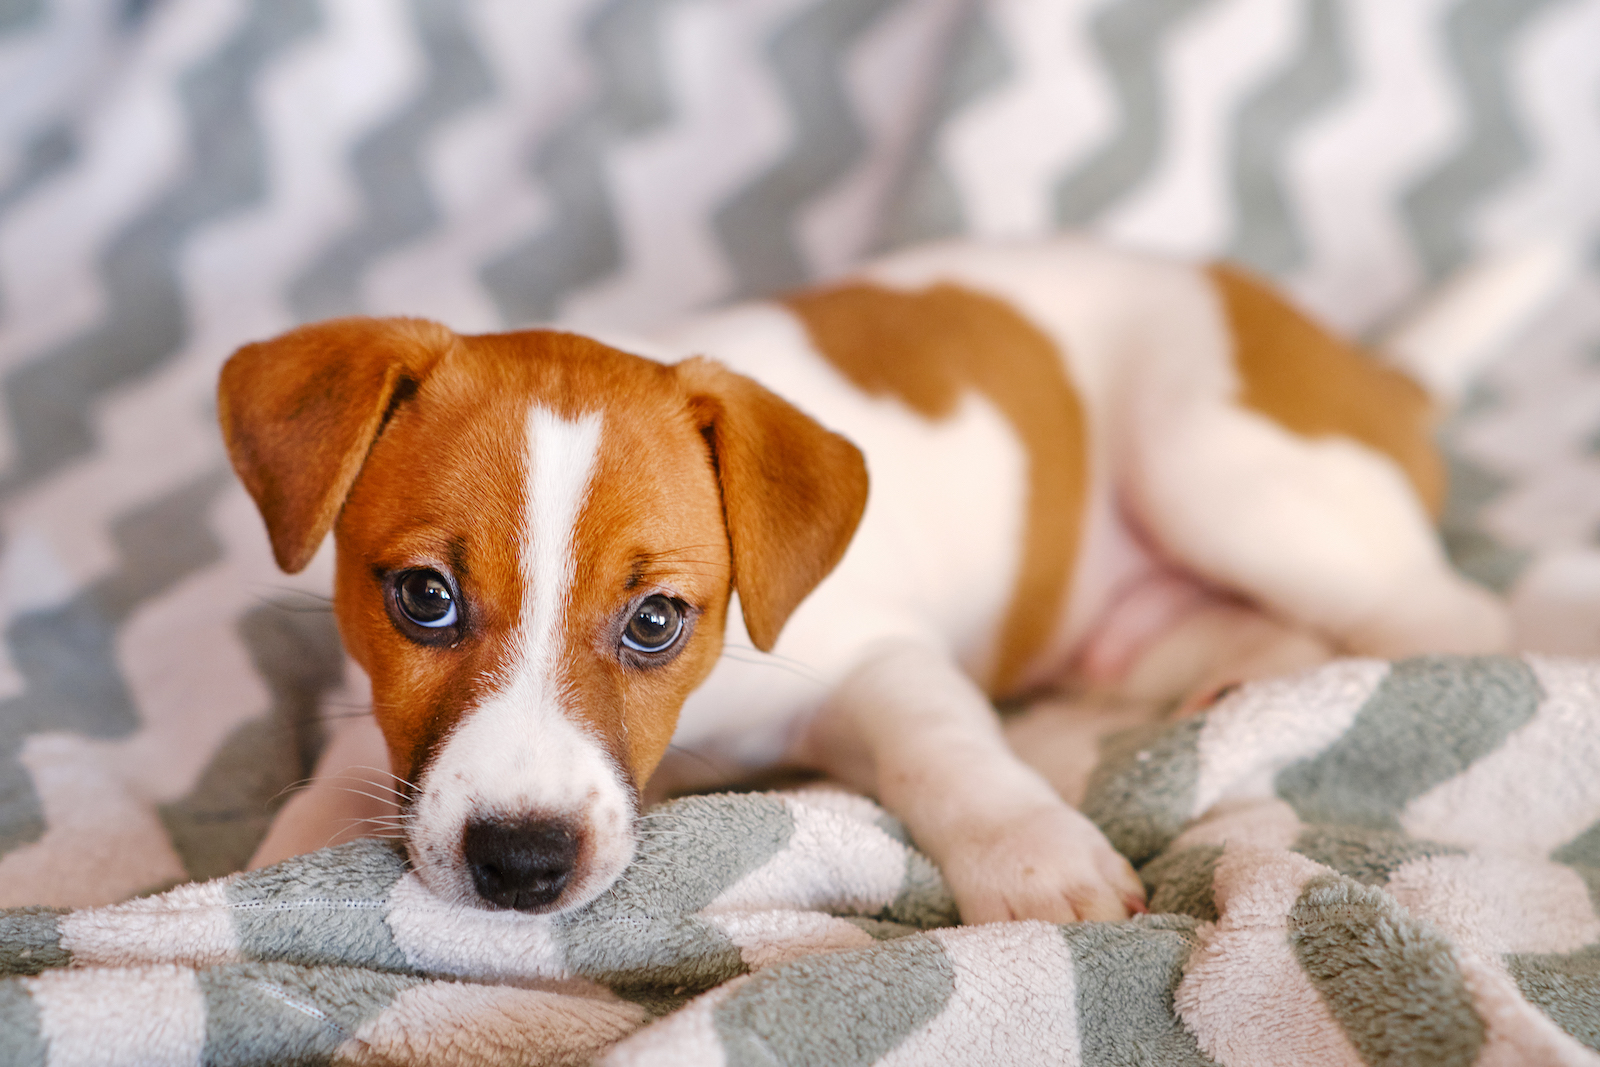 5 Ideas to Help Your Puppy With Teething